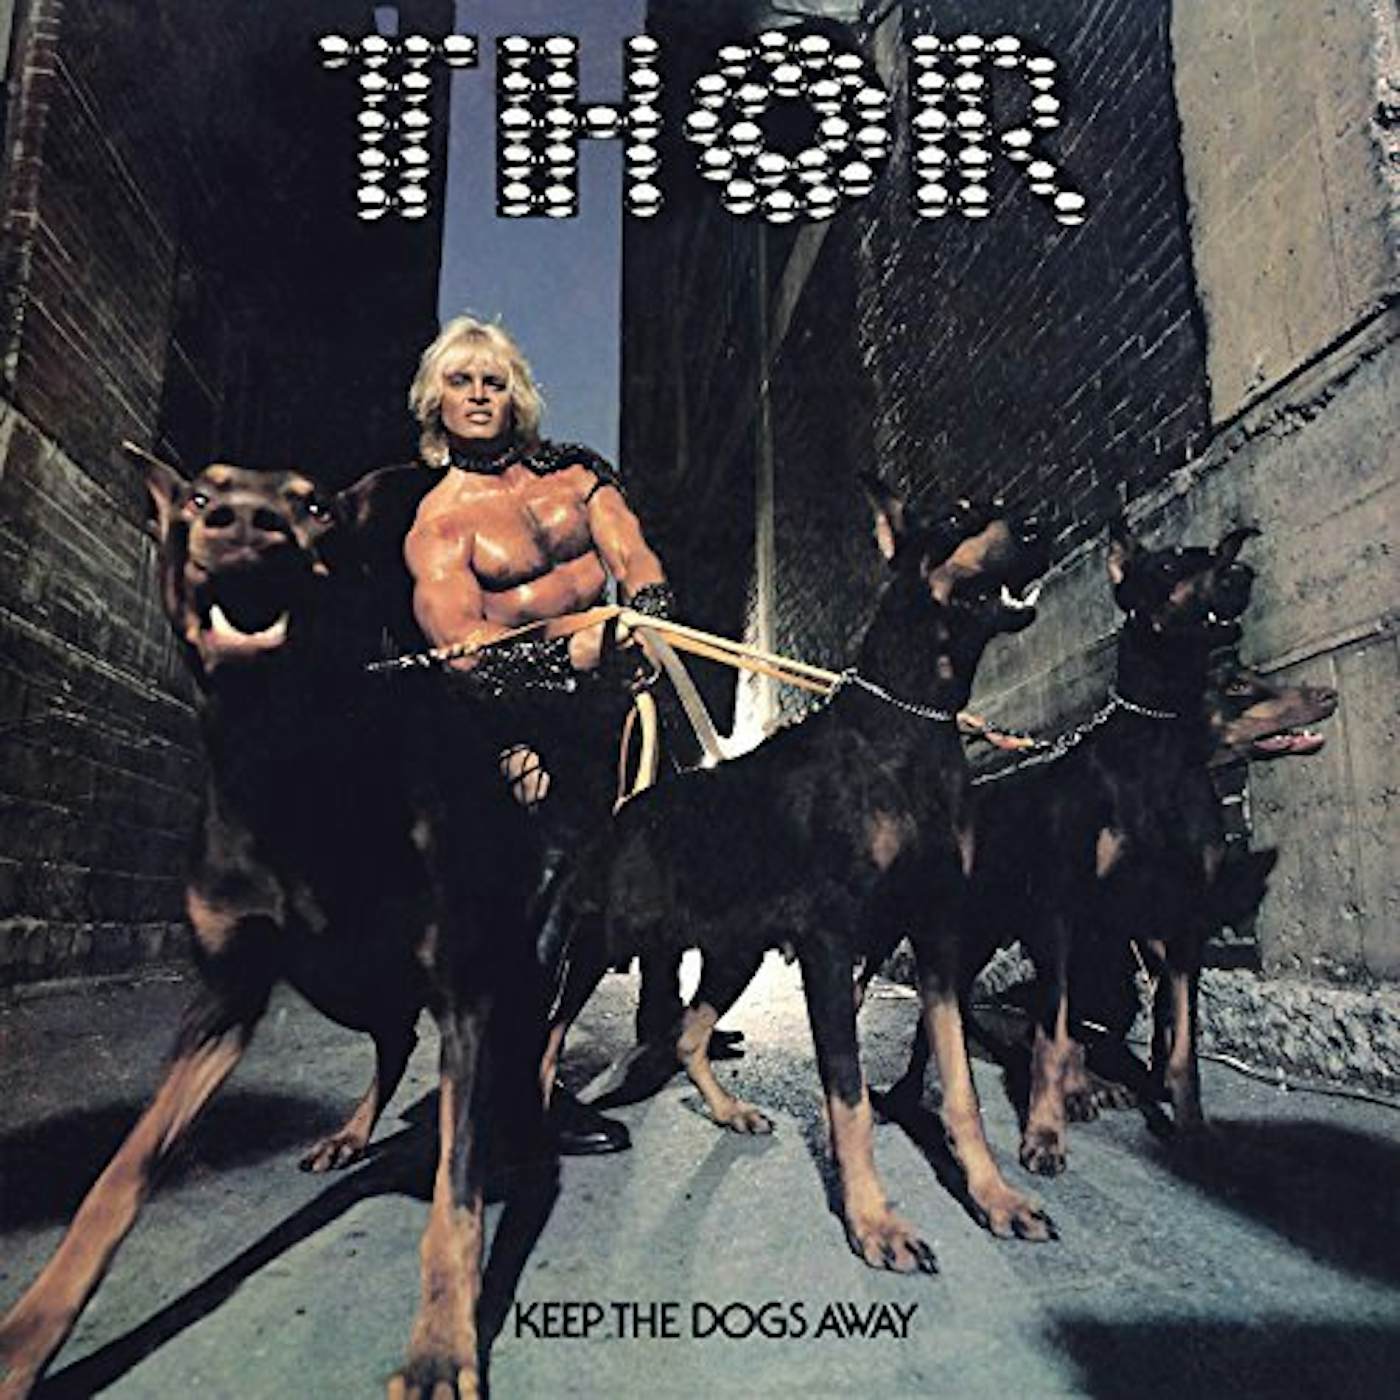 Thor KEEP THE DOGS AWAY (DELUXE EDITION) CD